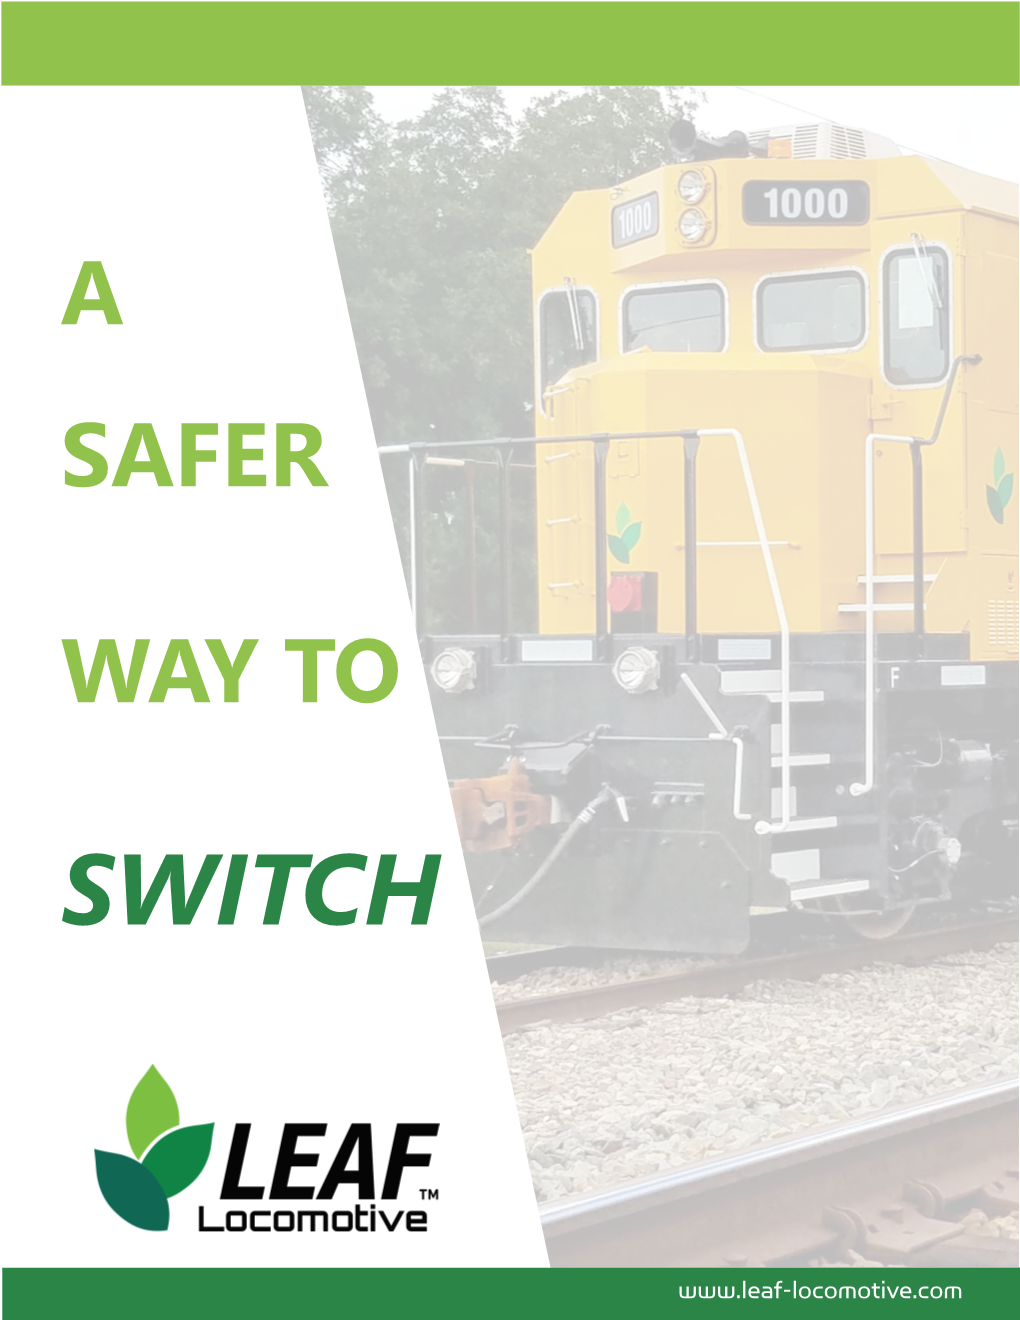 Leaf-Locomotive.Com LEAF® Tier 4 Switching Technical Specifications